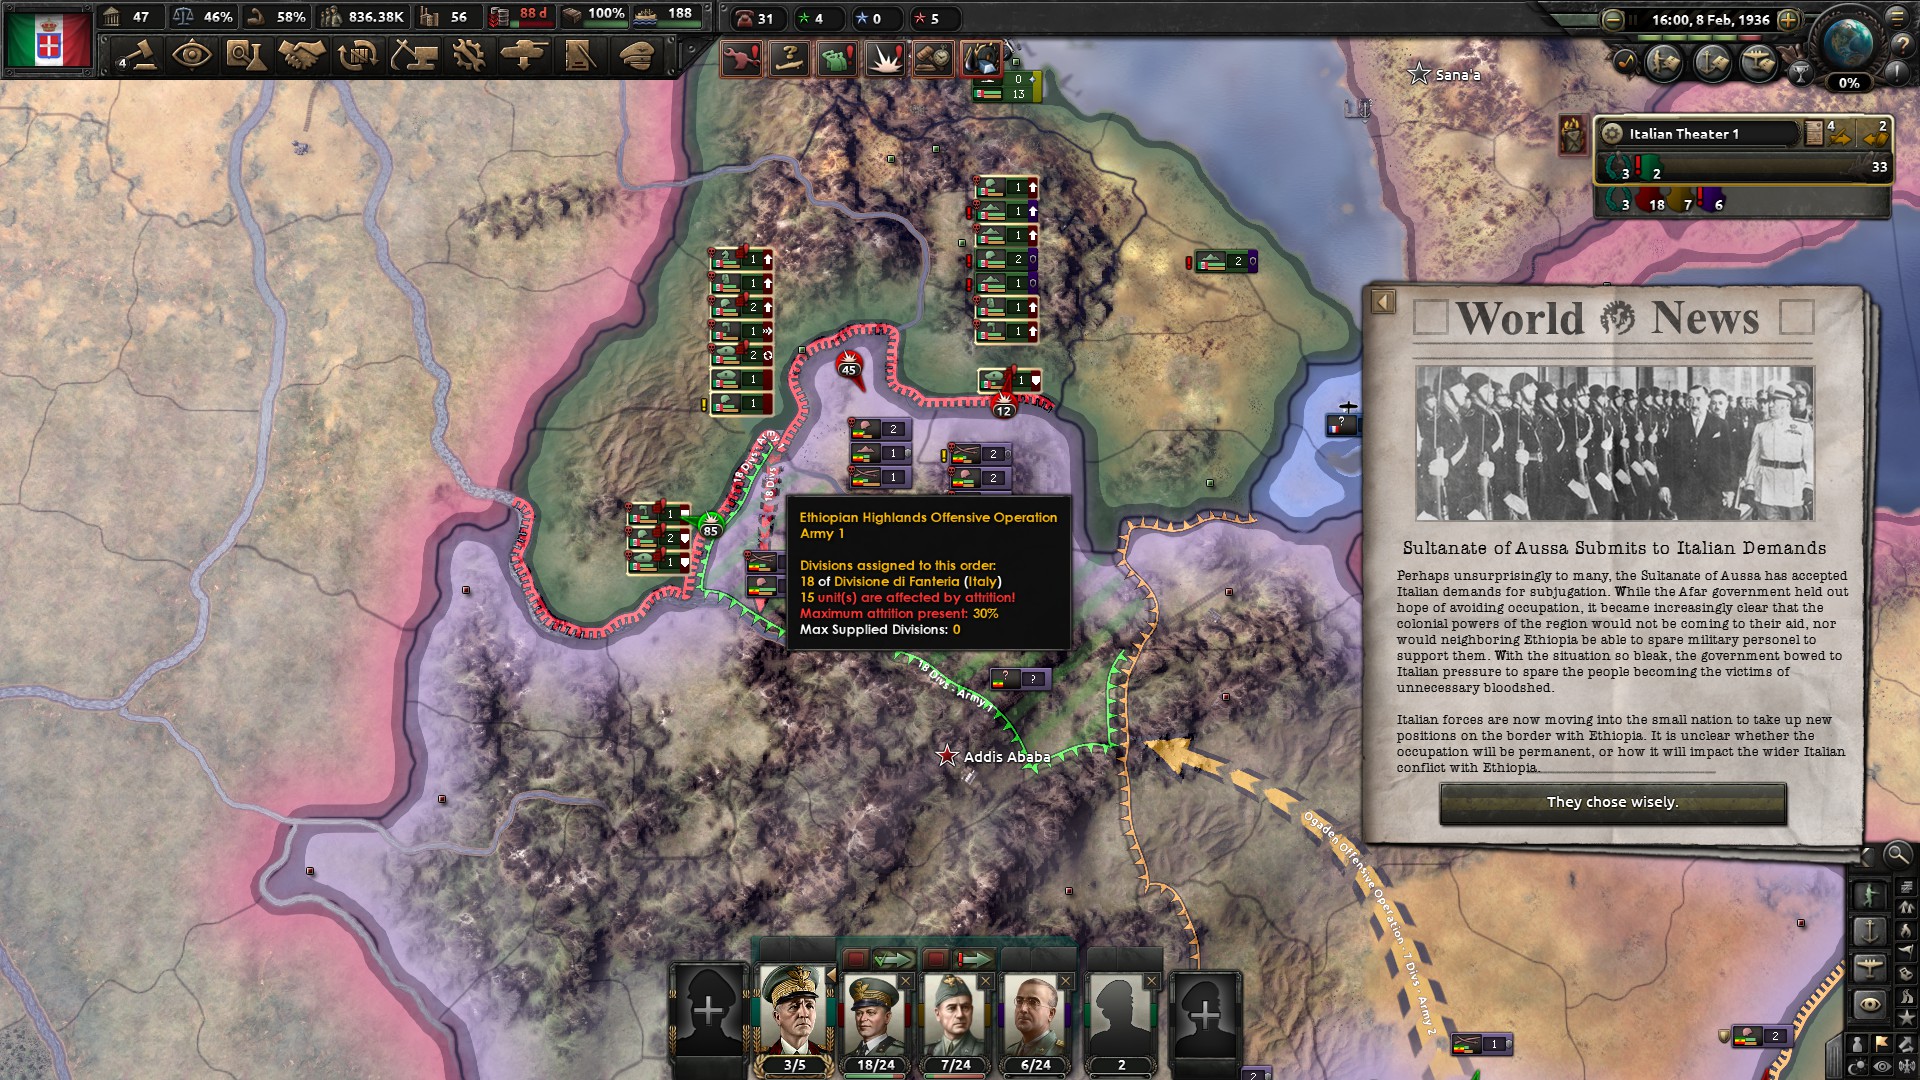 Hearts of Iron IV - How to defeat Ethiopia - Start of the offensive and annexation of Aussa: - A9725A2